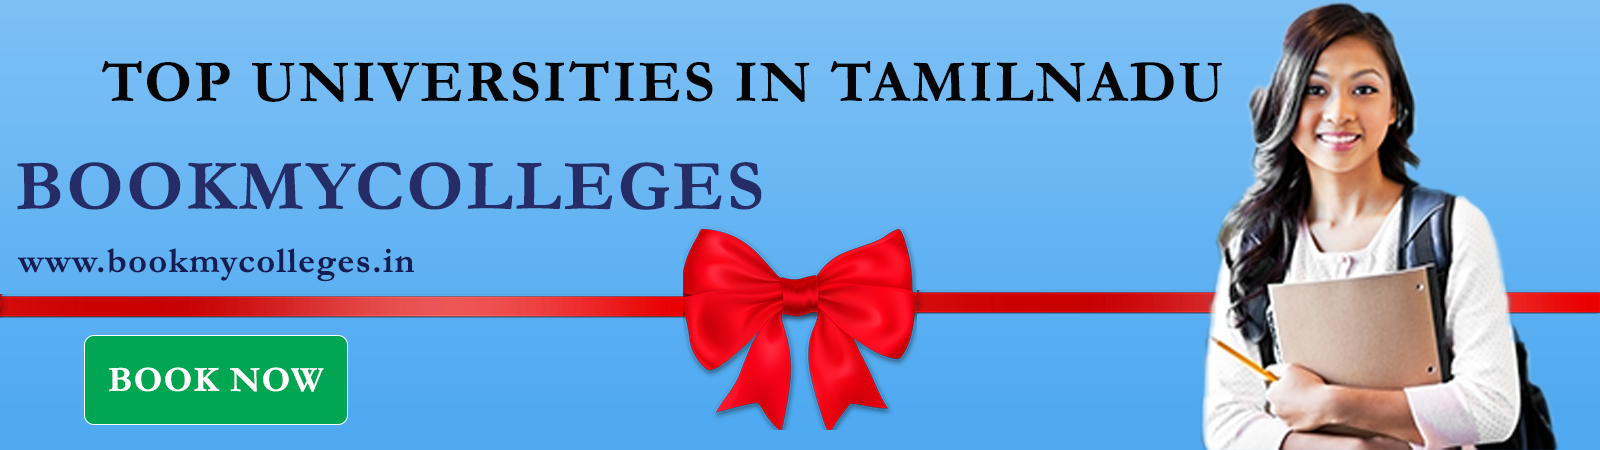 Banner Bookmycolleges Poster